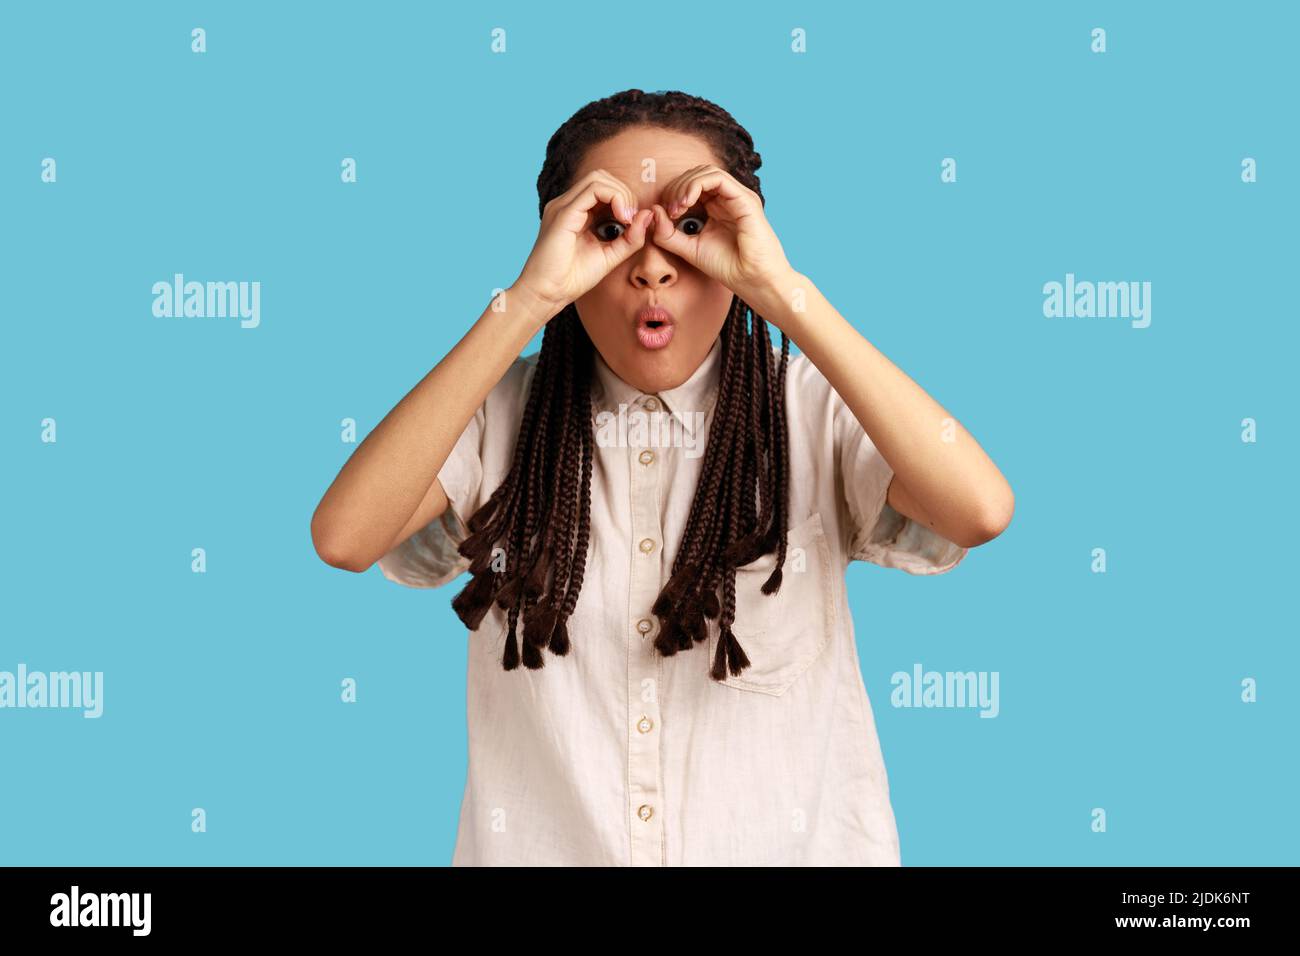 Funny playful woman with black dreadlocks covering eyes with ok signs, makes binoculars, foolishes around and looks through goggles, wearing white shirt. Indoor studio shot isolated on blue background Stock Photo